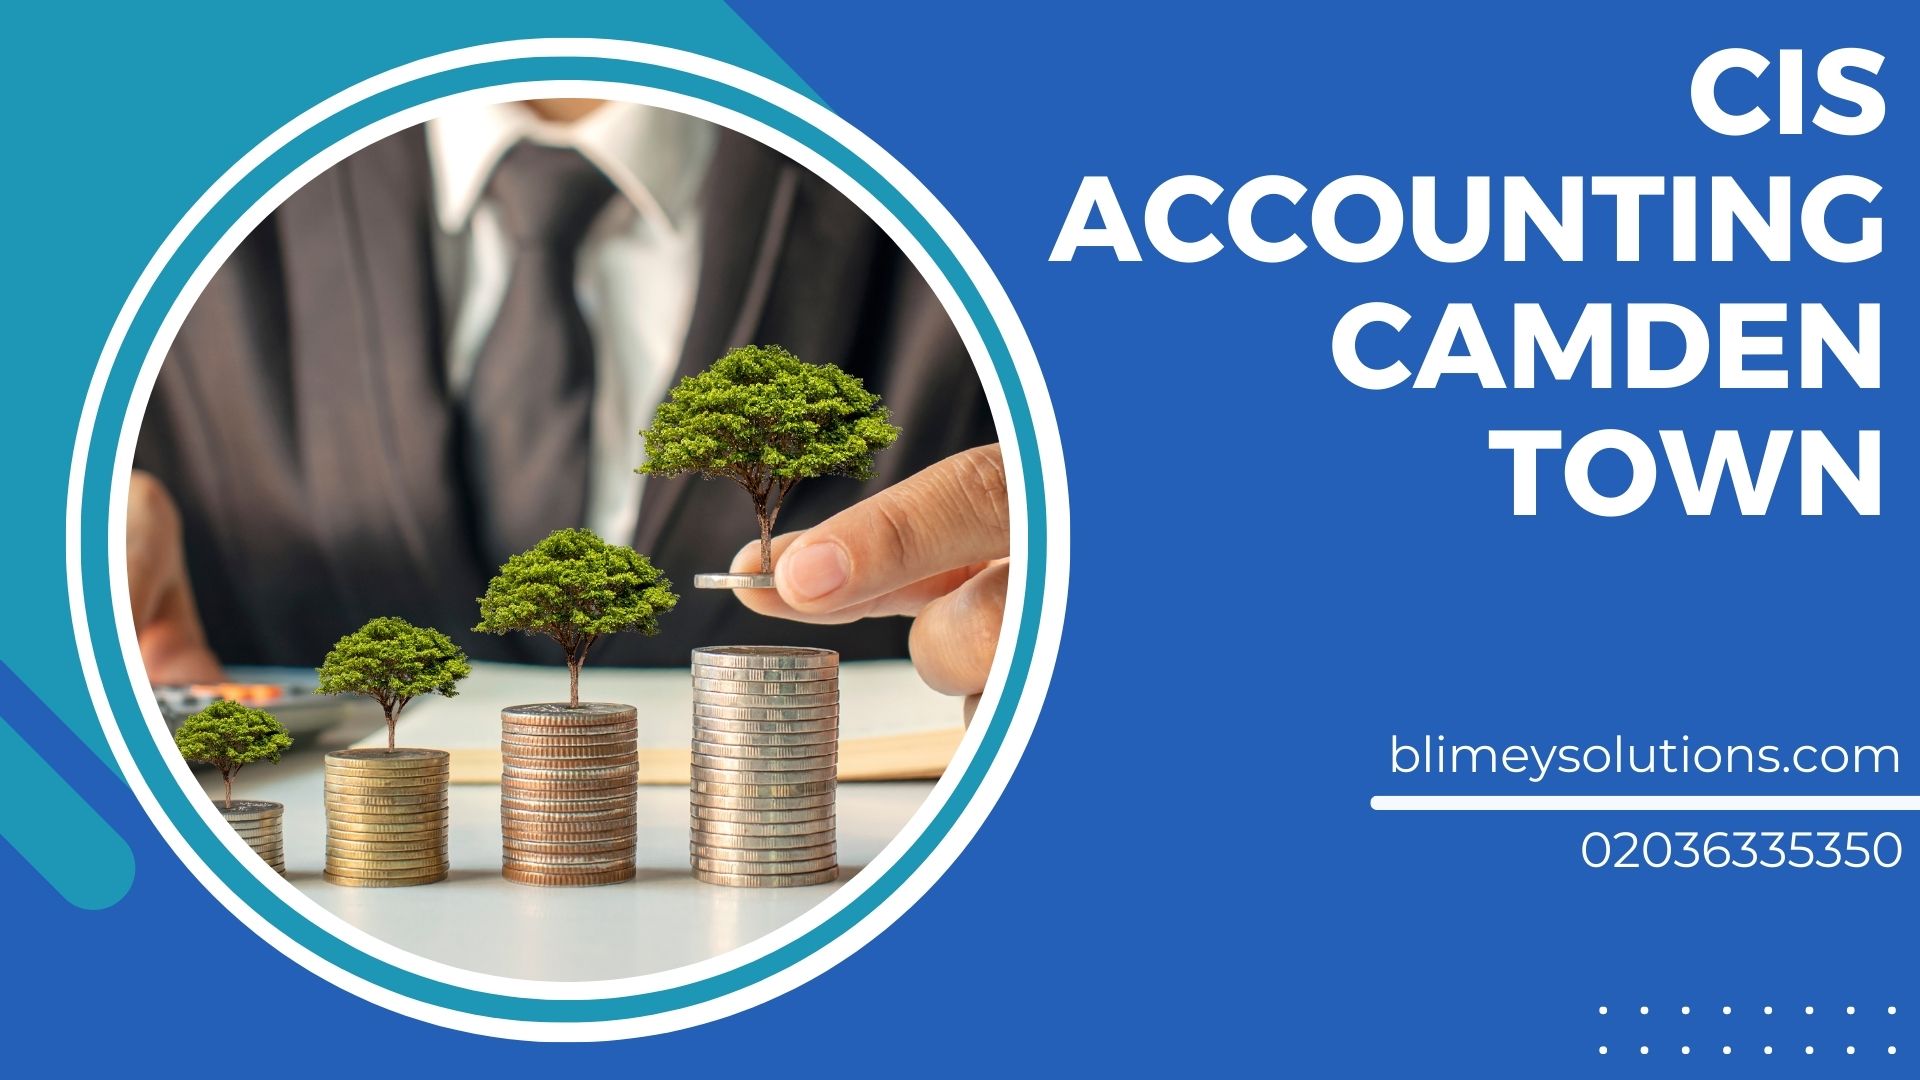 CIS Accounting in Camden Town NW1 London